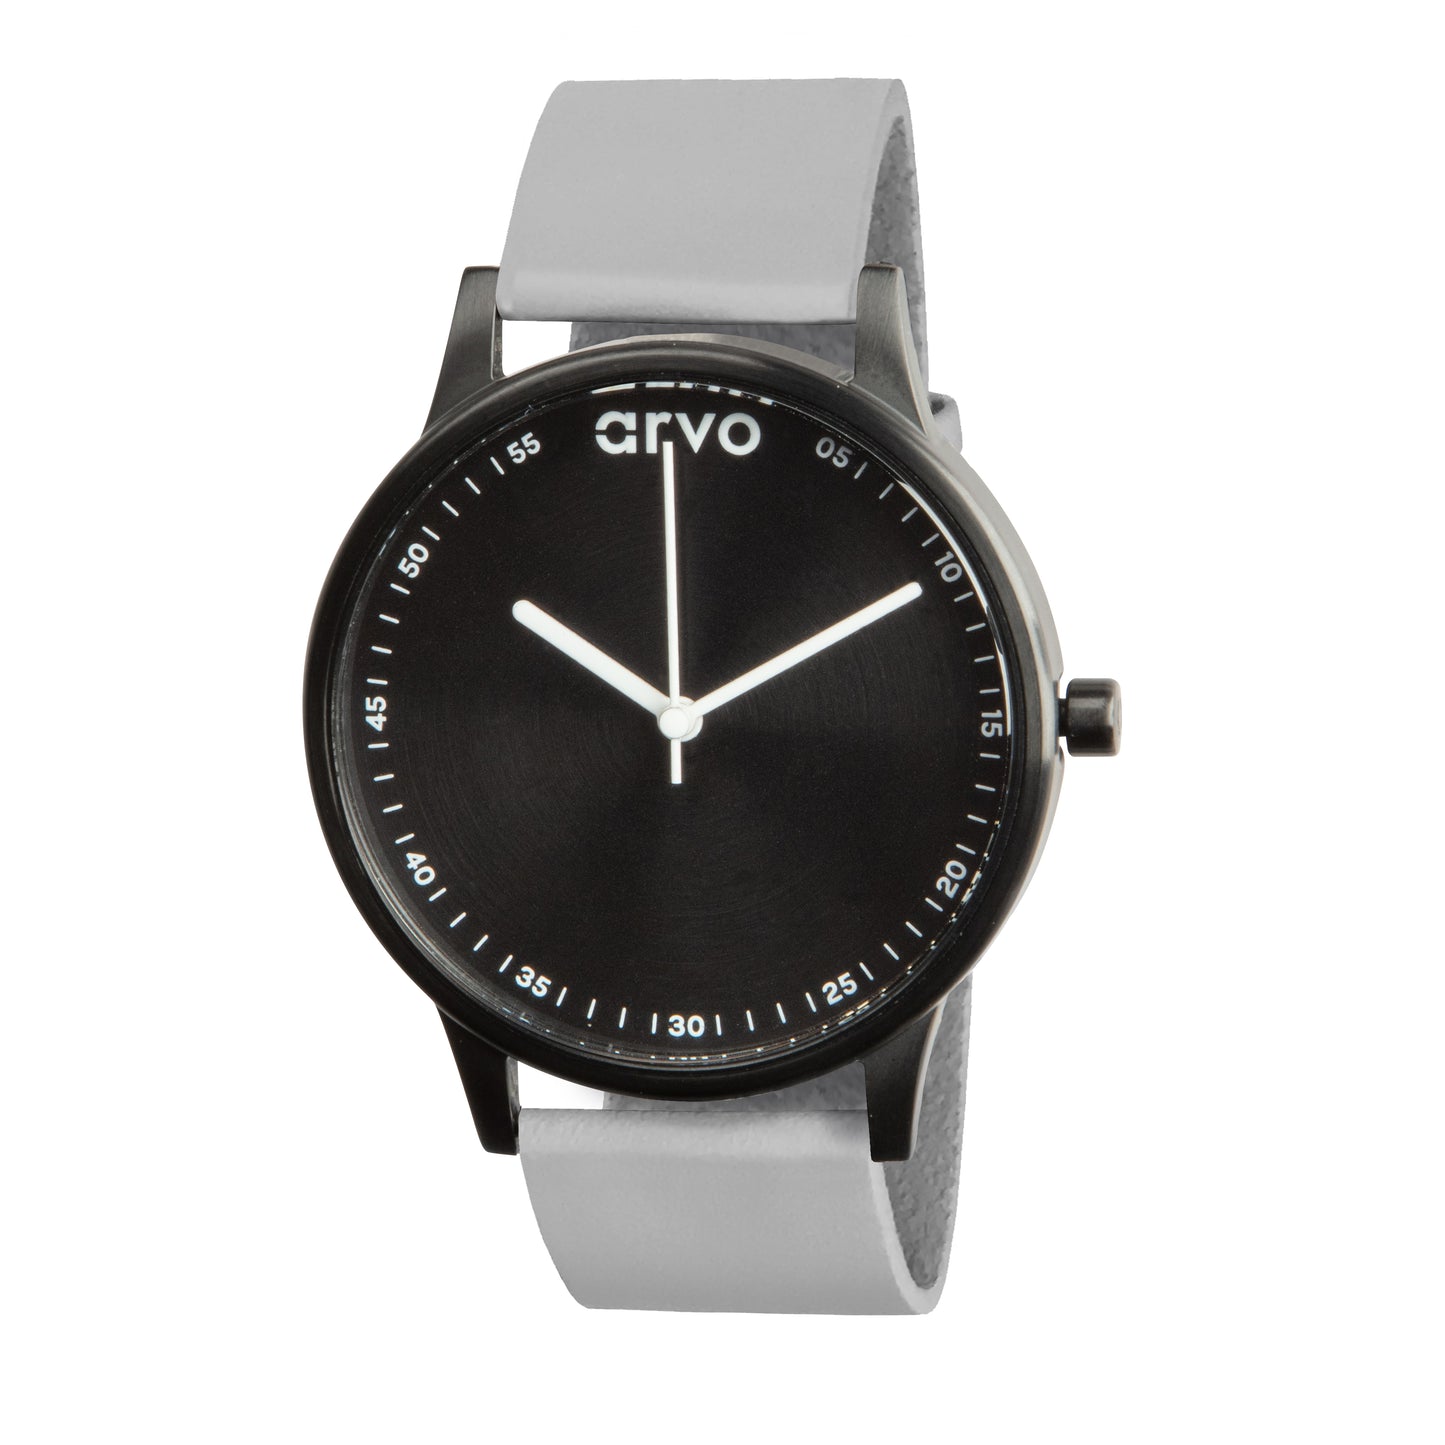 Arvo Time Traveler Sport Watch for men with gray leather band